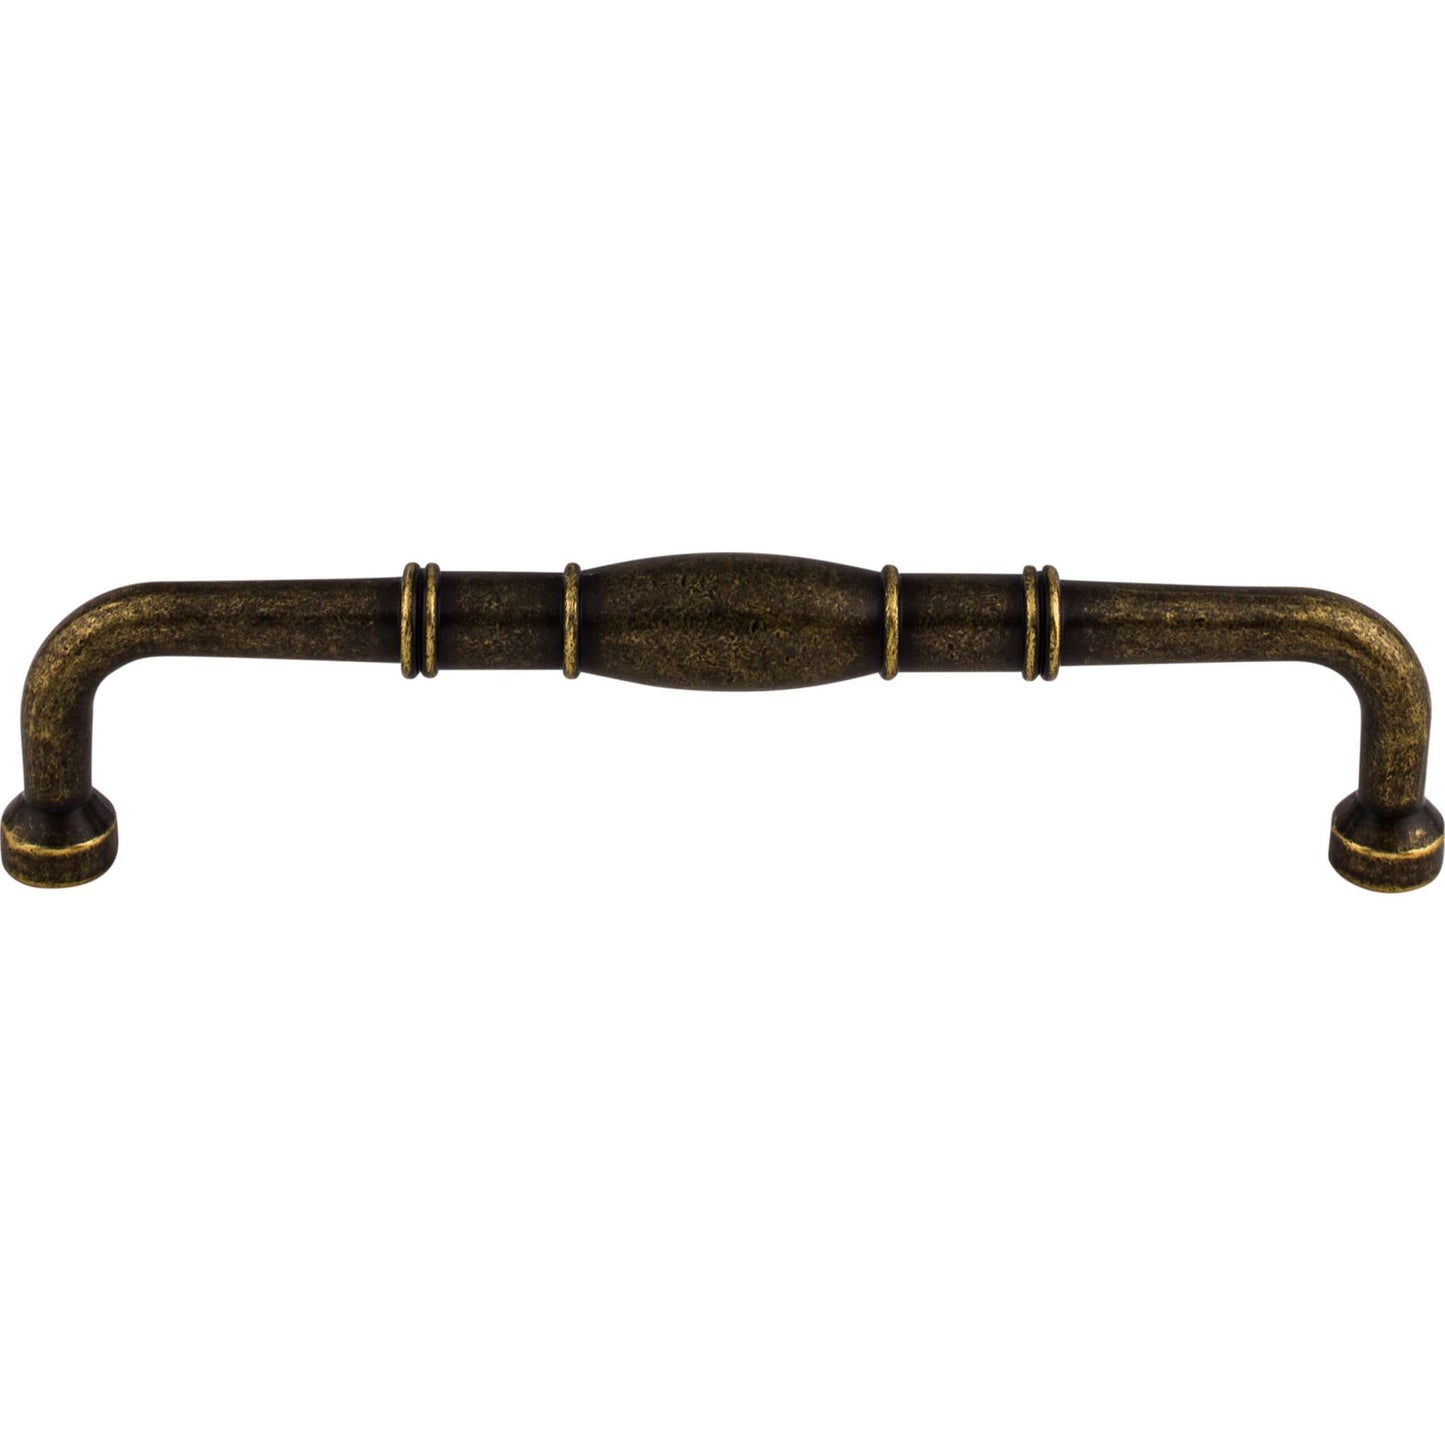 Top Knobs - Normandy D-Pull